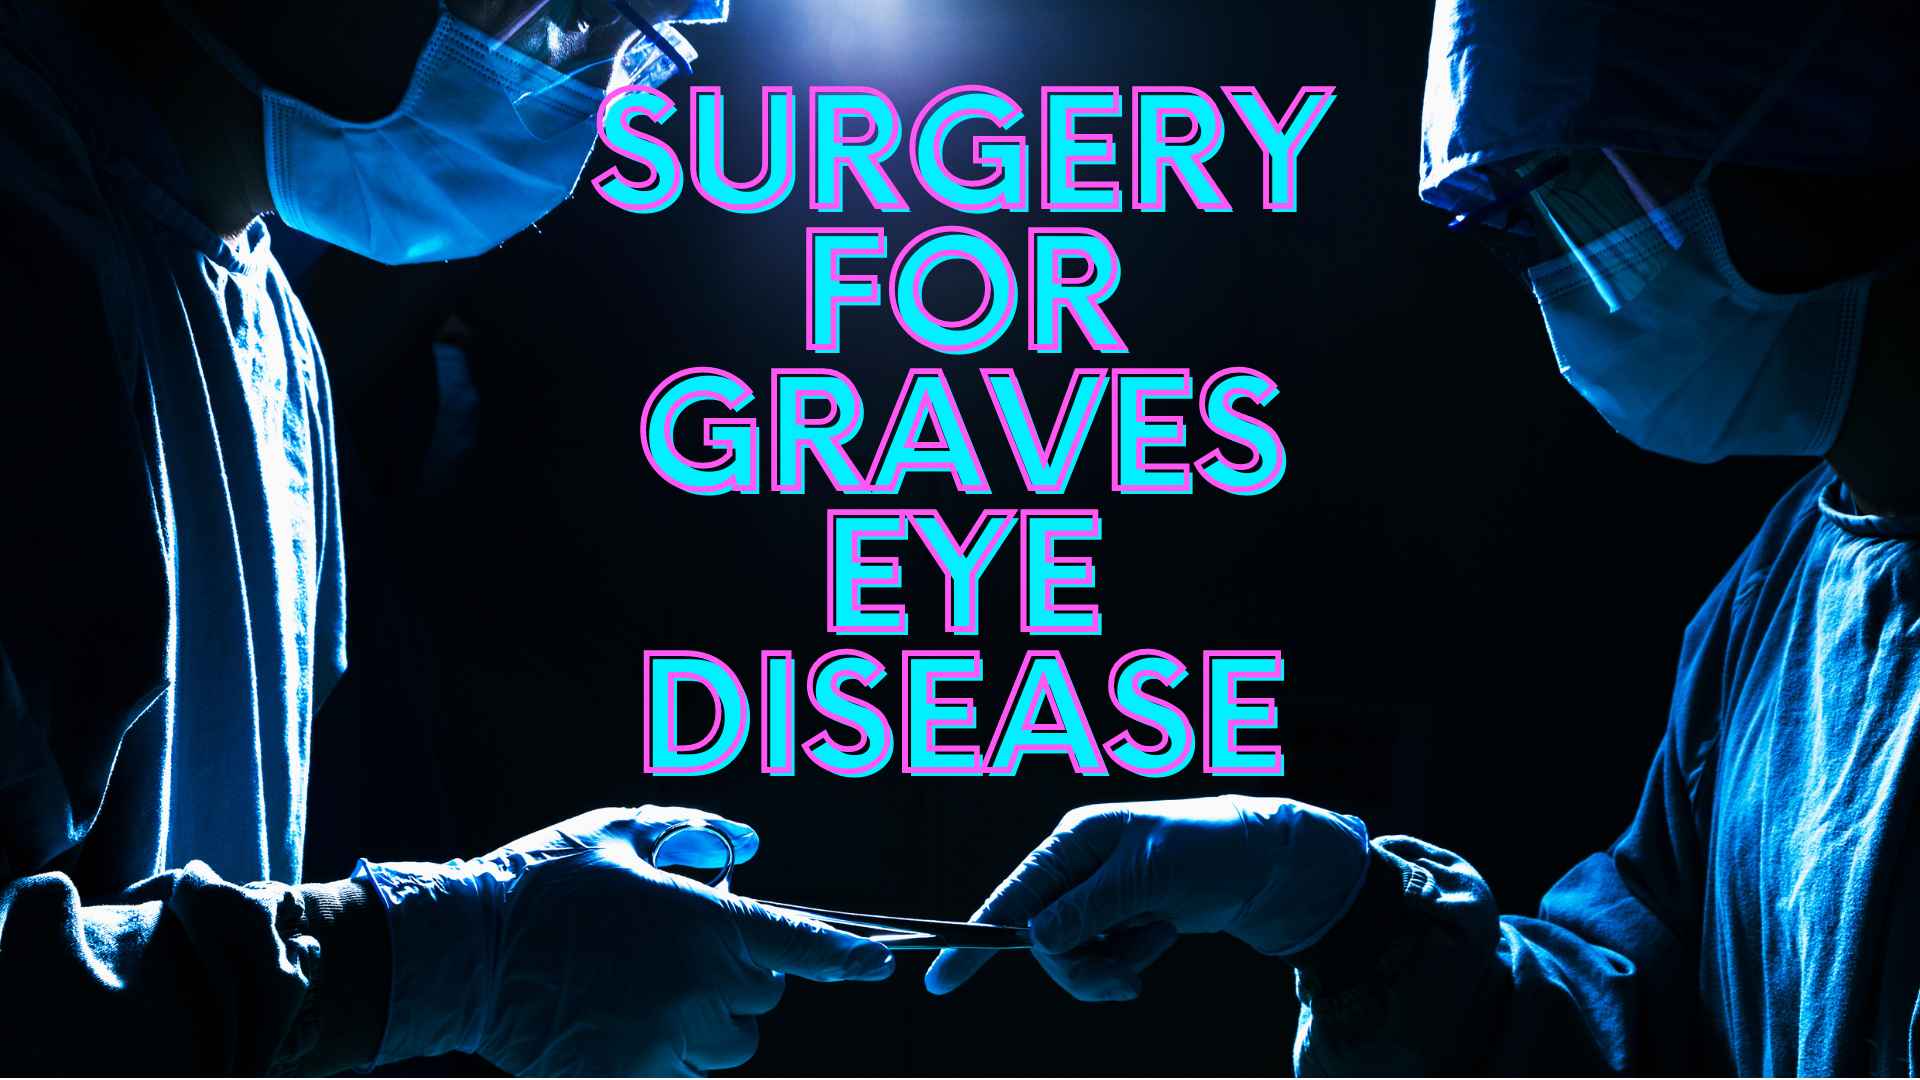 Surgery for Graves eye disease by Dr Anthony Maloof, Sydney.